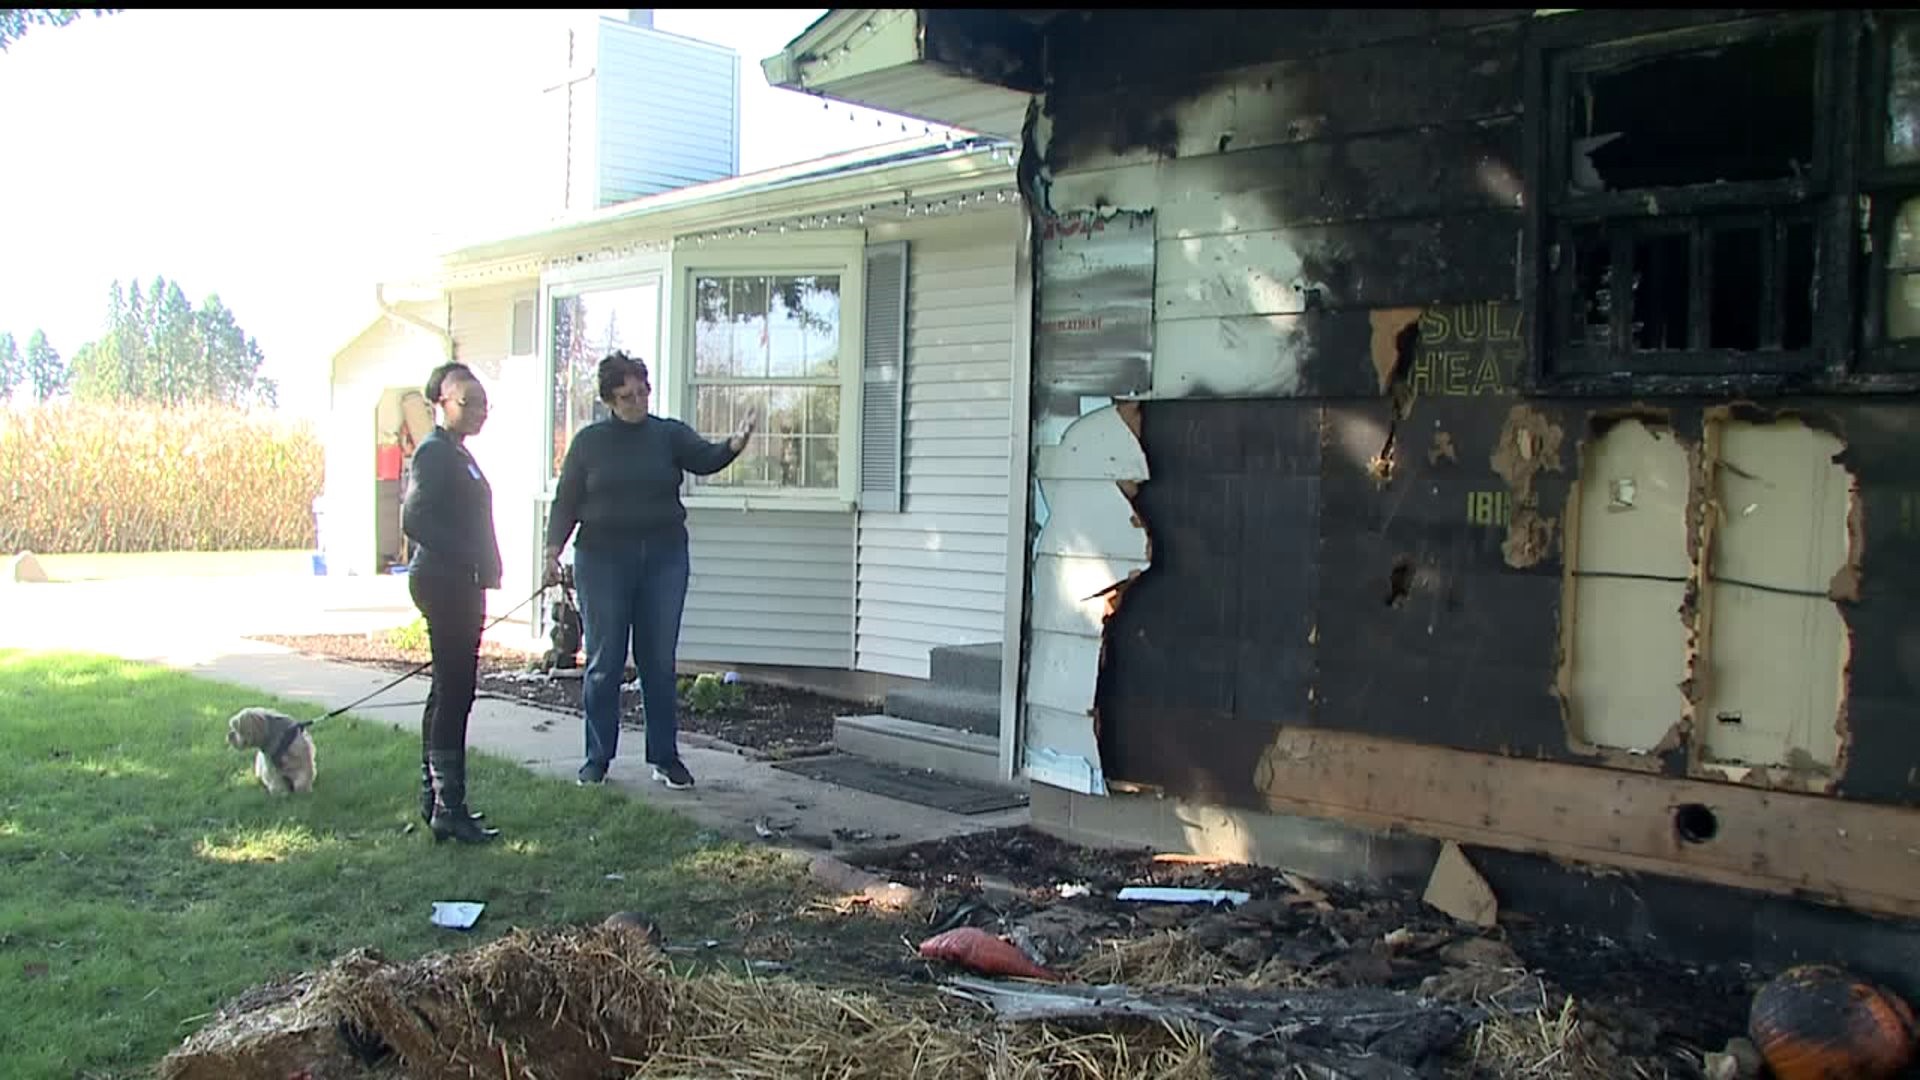 Halloween decorations cause house fire